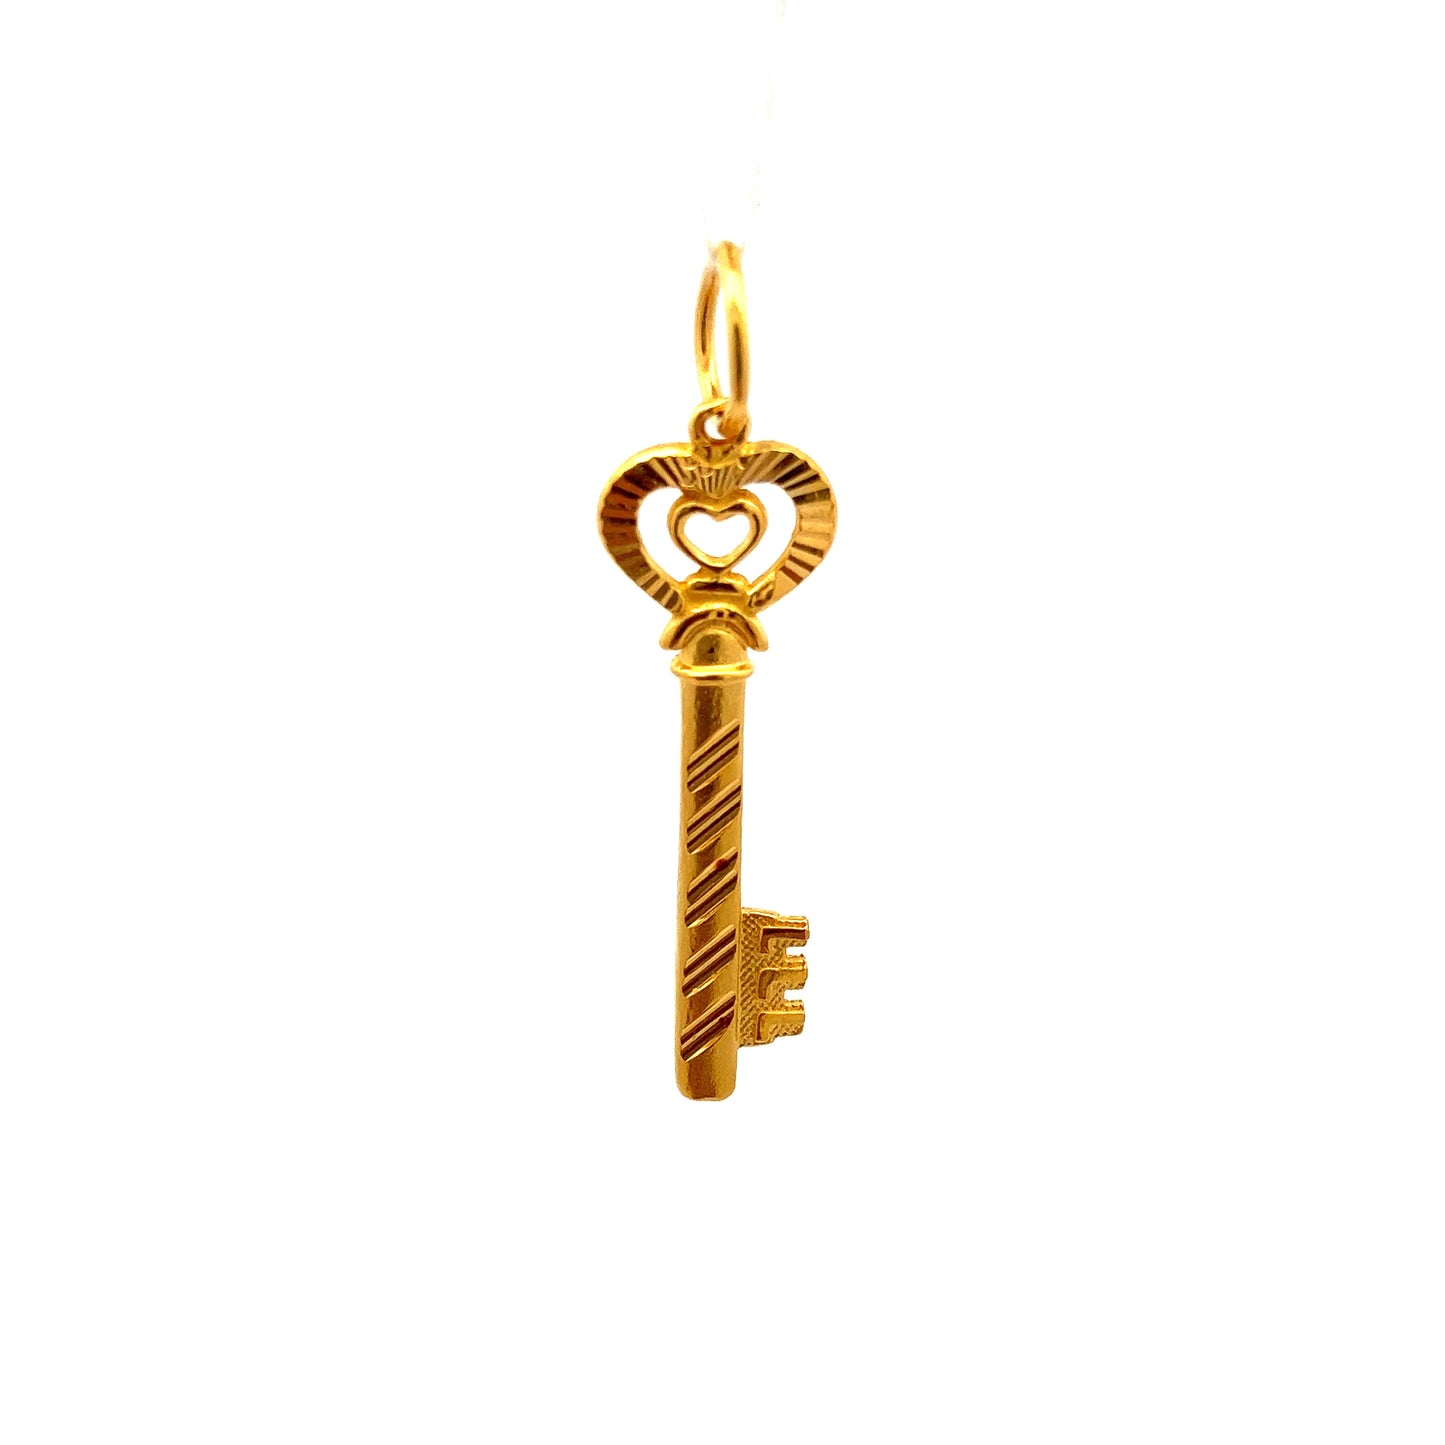 GOLD PENDANT ( 22K ) ( 2.63g ) - 0013010 Chain sold separately